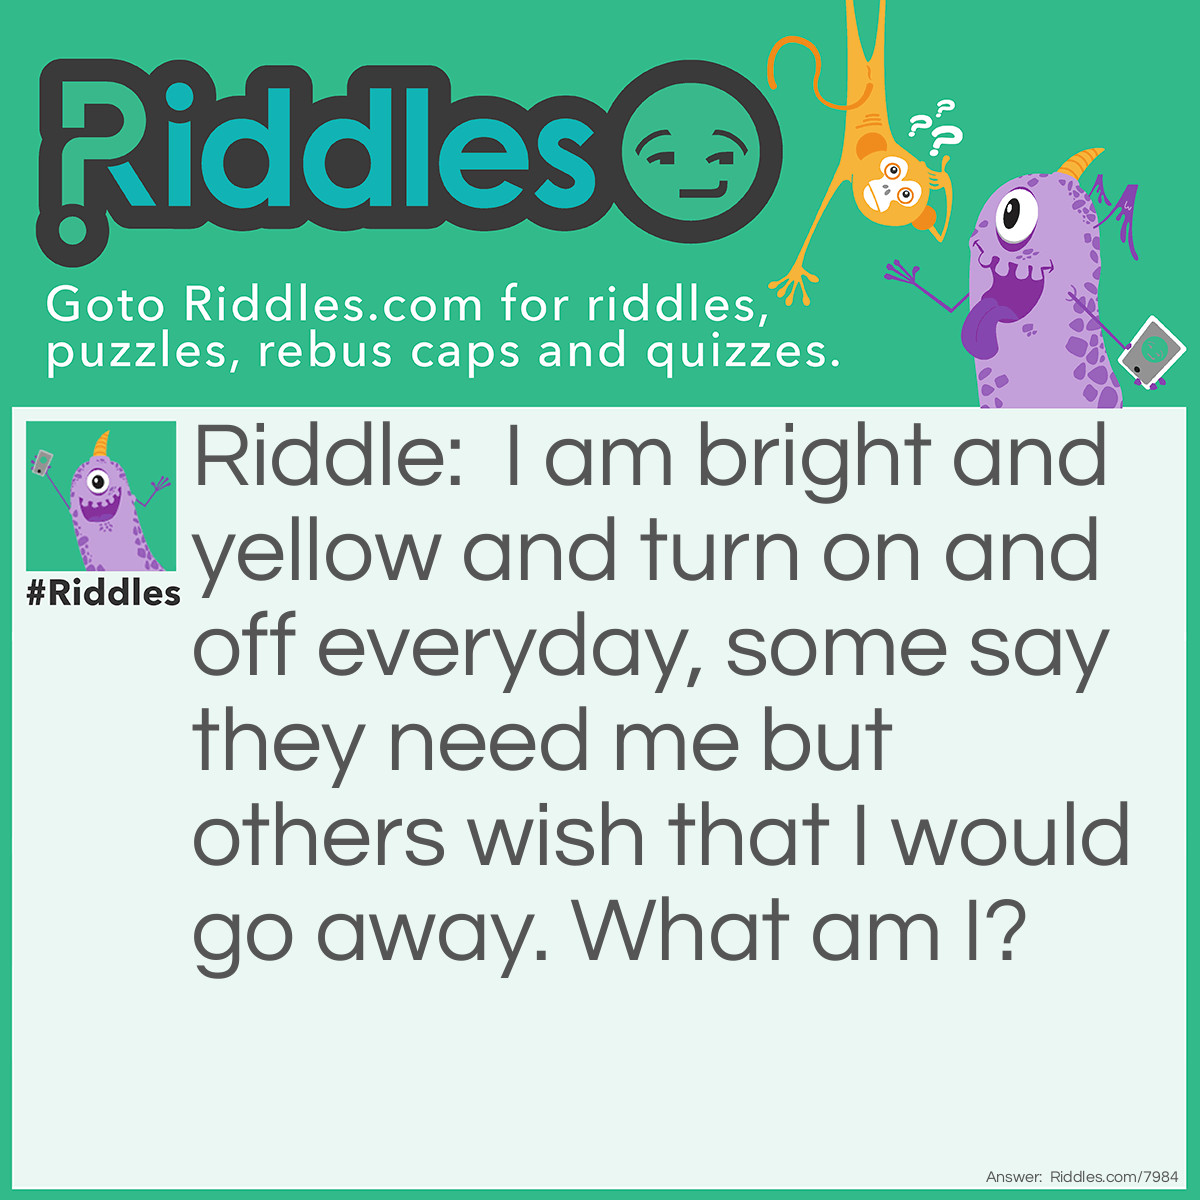 Riddle: I am bright and yellow and turn on and off everyday, some say they need me but others wish that I would go away. What am I? Answer: The Sun.